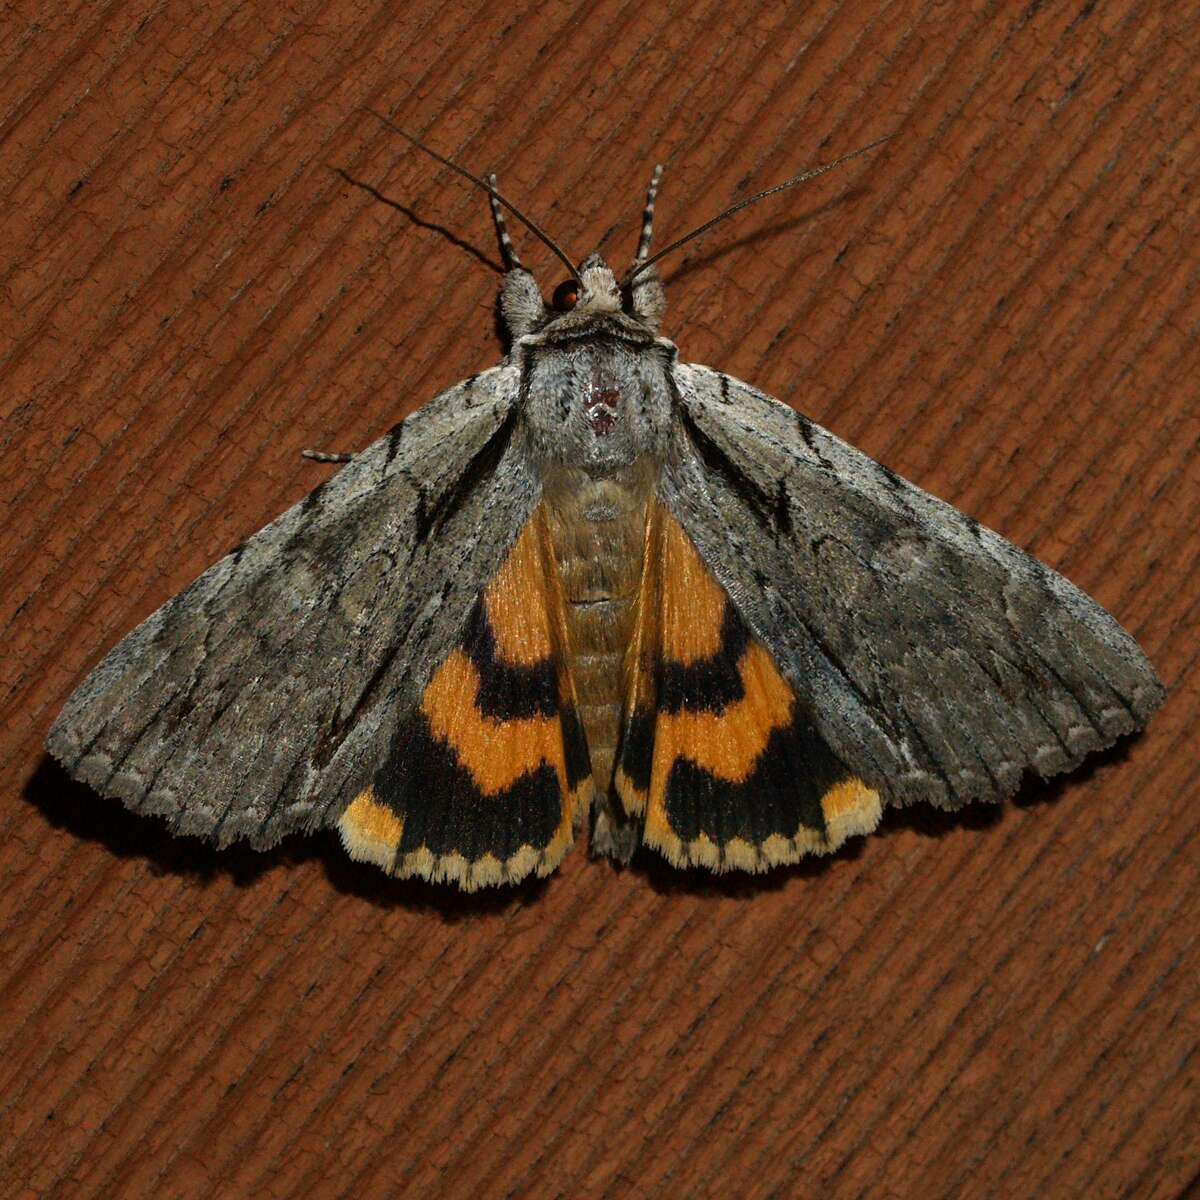 Image of Clinton's Underwing Moth